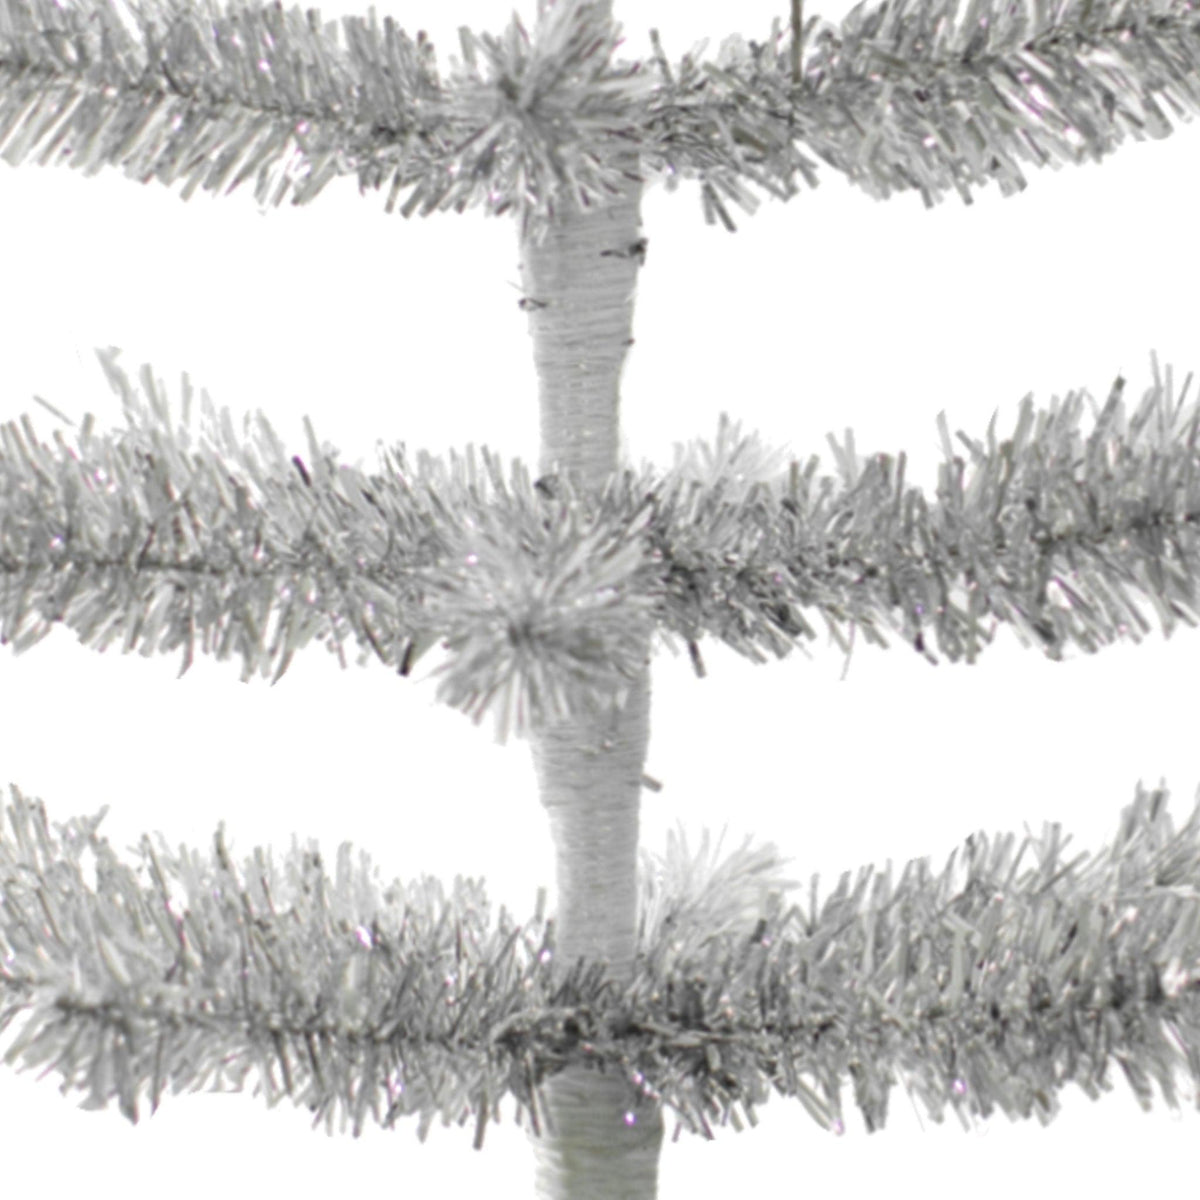 Middle section of the 1in thin brush Silver Tinsel Christmas Tree sold at leedisplay.com